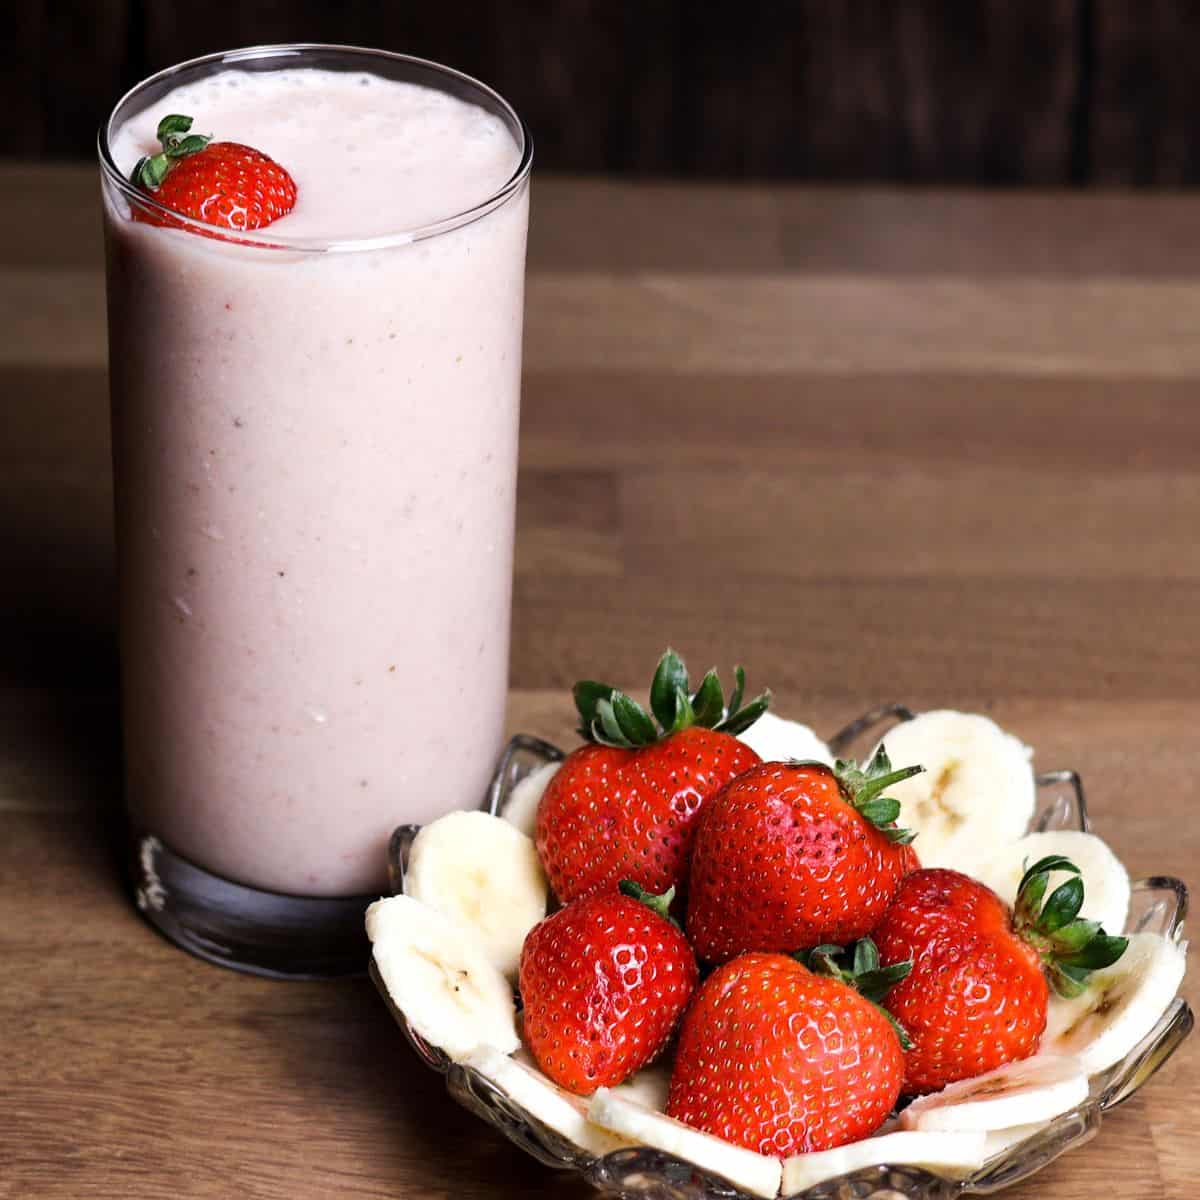 A side view of a tall glass filled with a smooth pink strawberry banana smoothie, beside a plate of whole strawberries and banana slices.